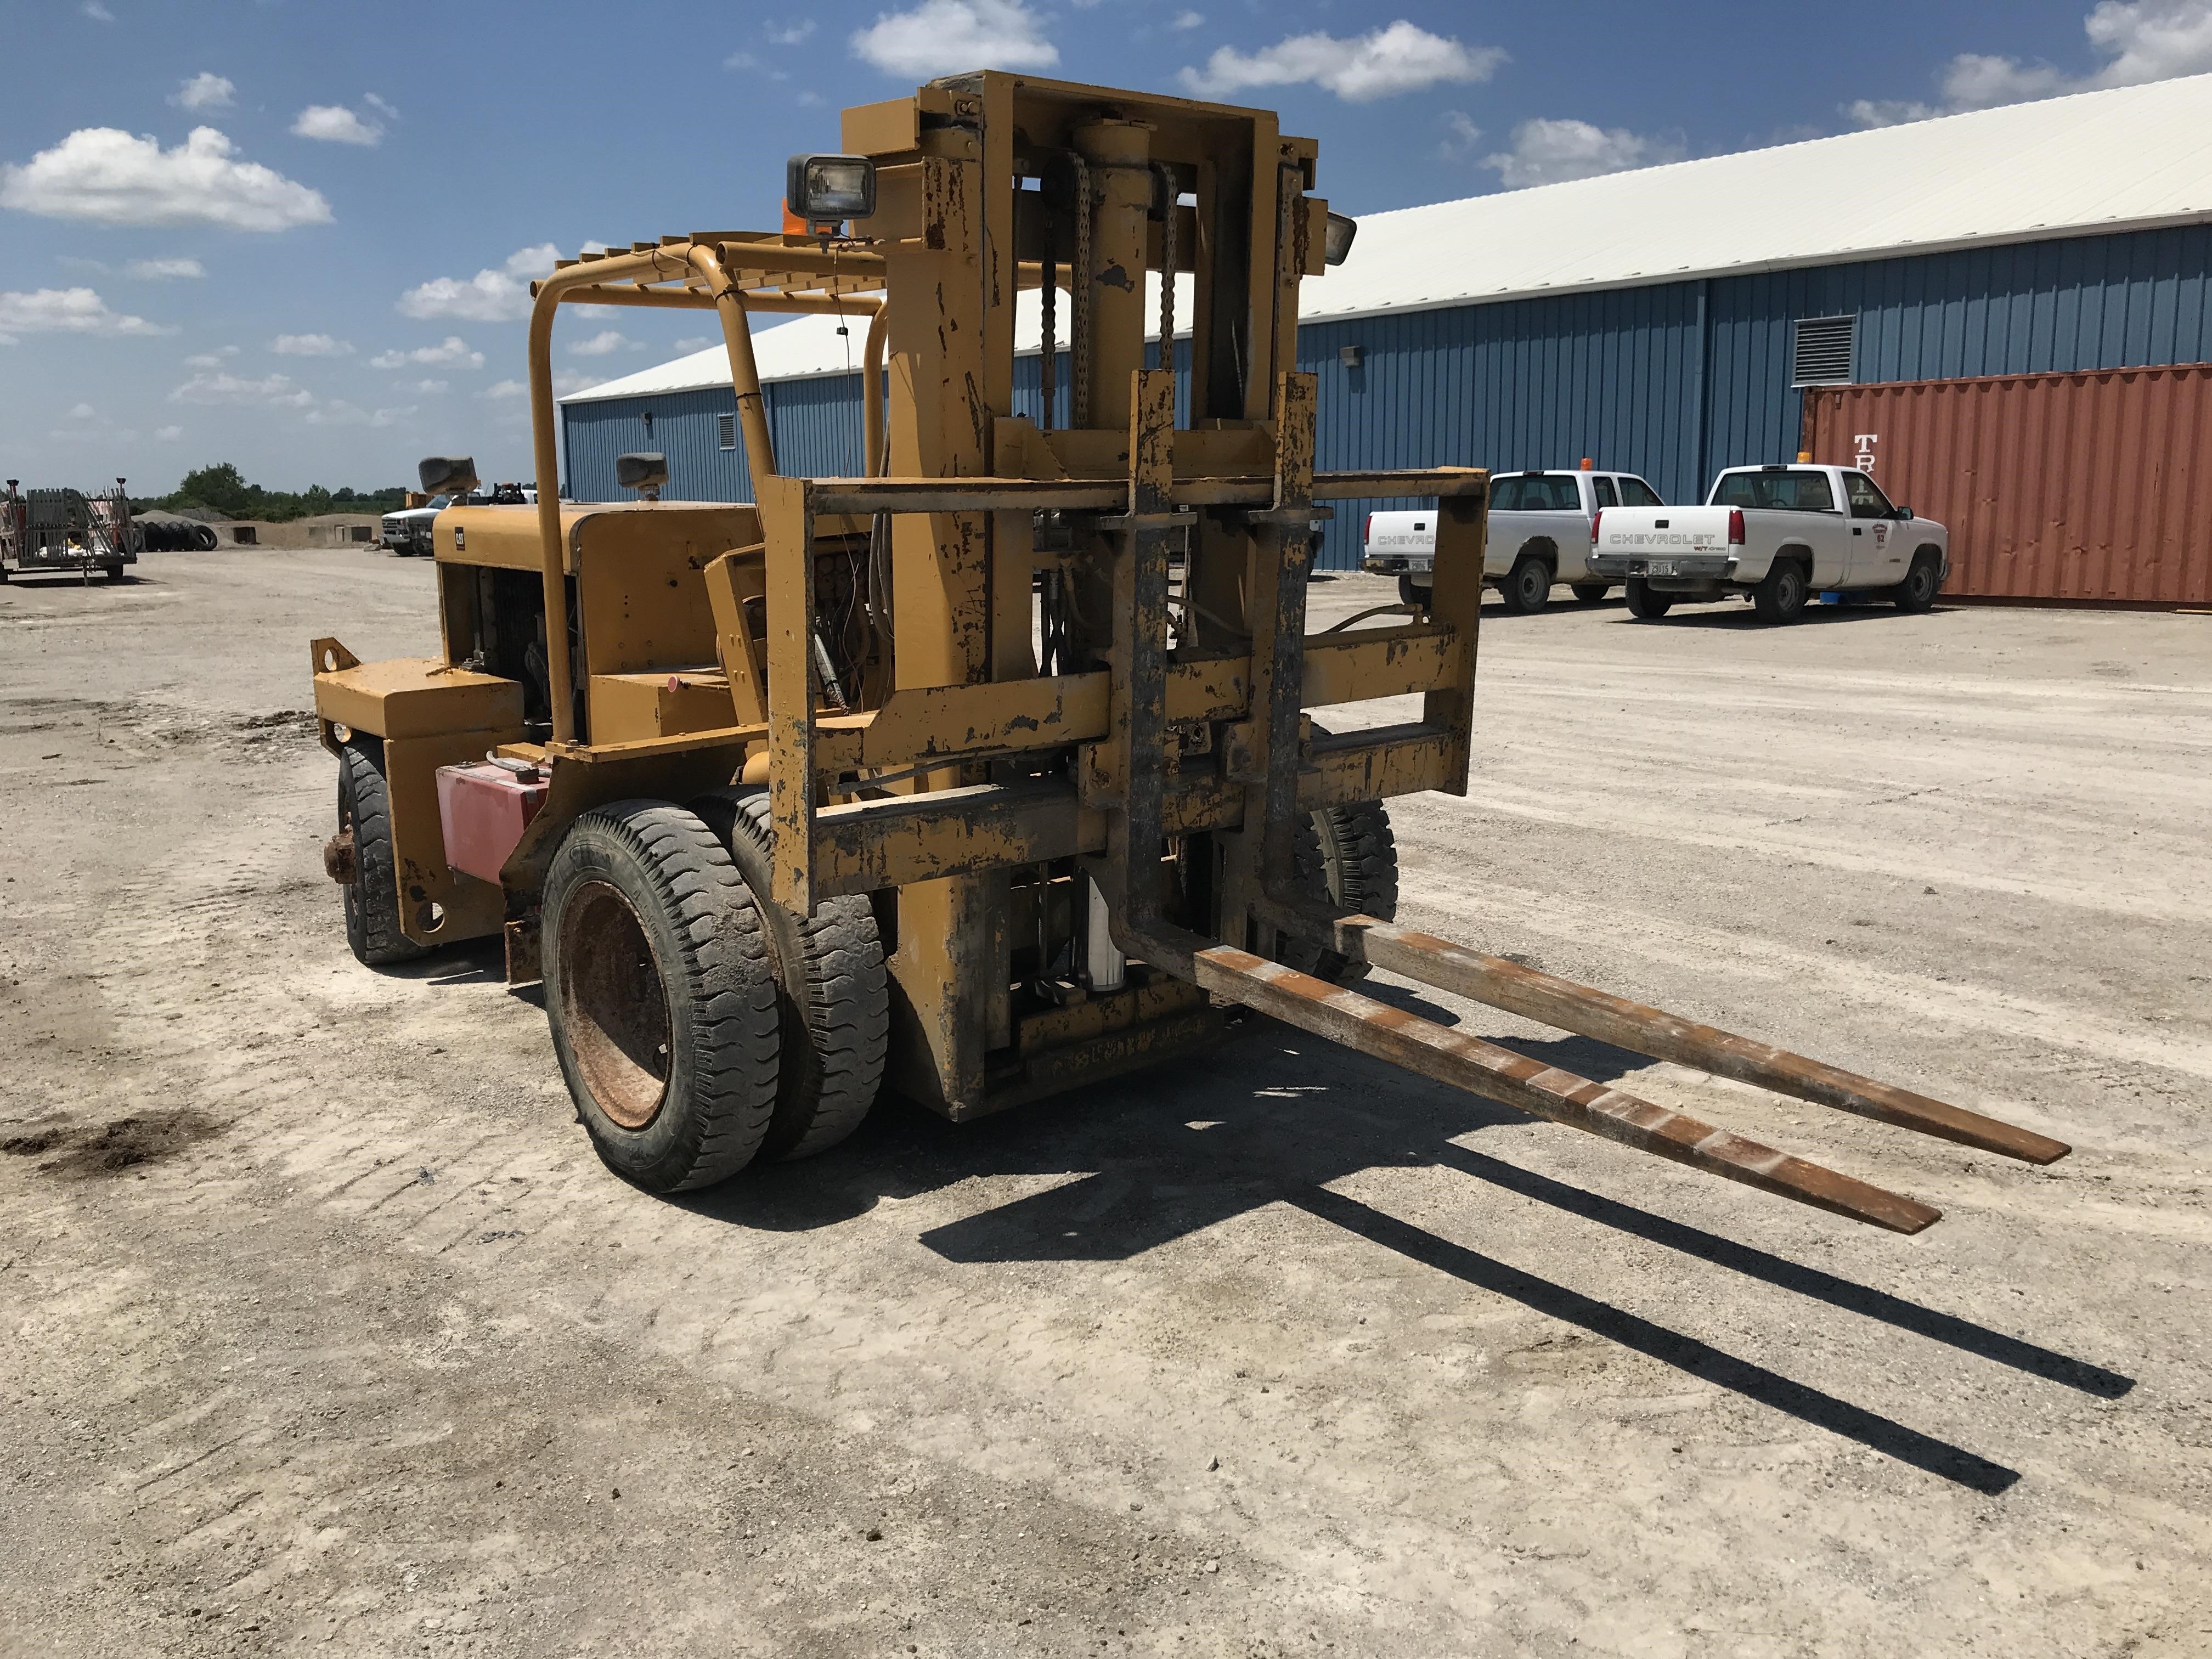 CC 3800 SUPERLIFT - Sarensshop  Nothing too heavy, nothing too high